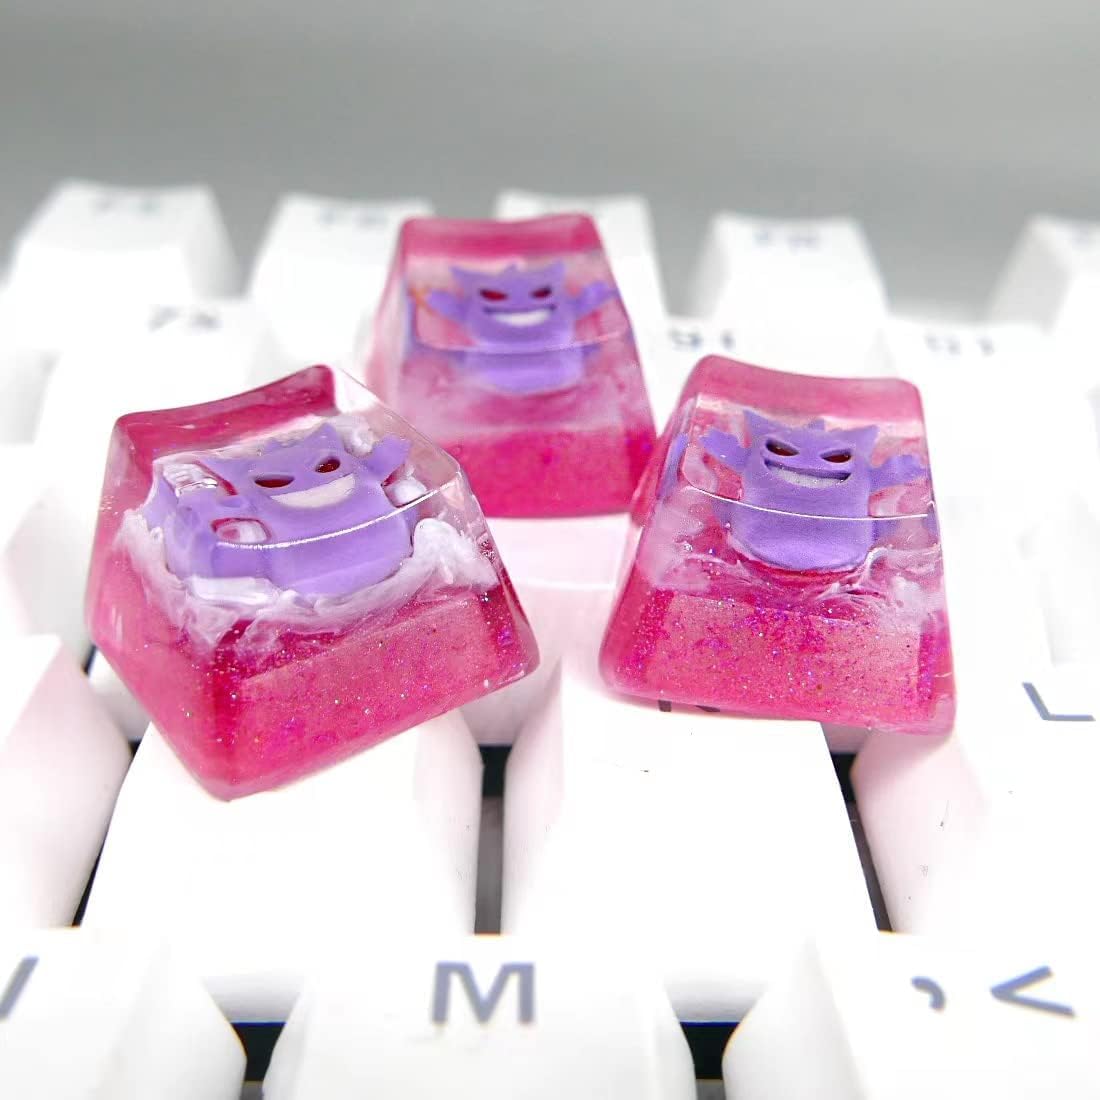 HPNYEZI Gaming Keycaps Resin Keycaps for Cherry MX Swtiches Handmade (Style2)